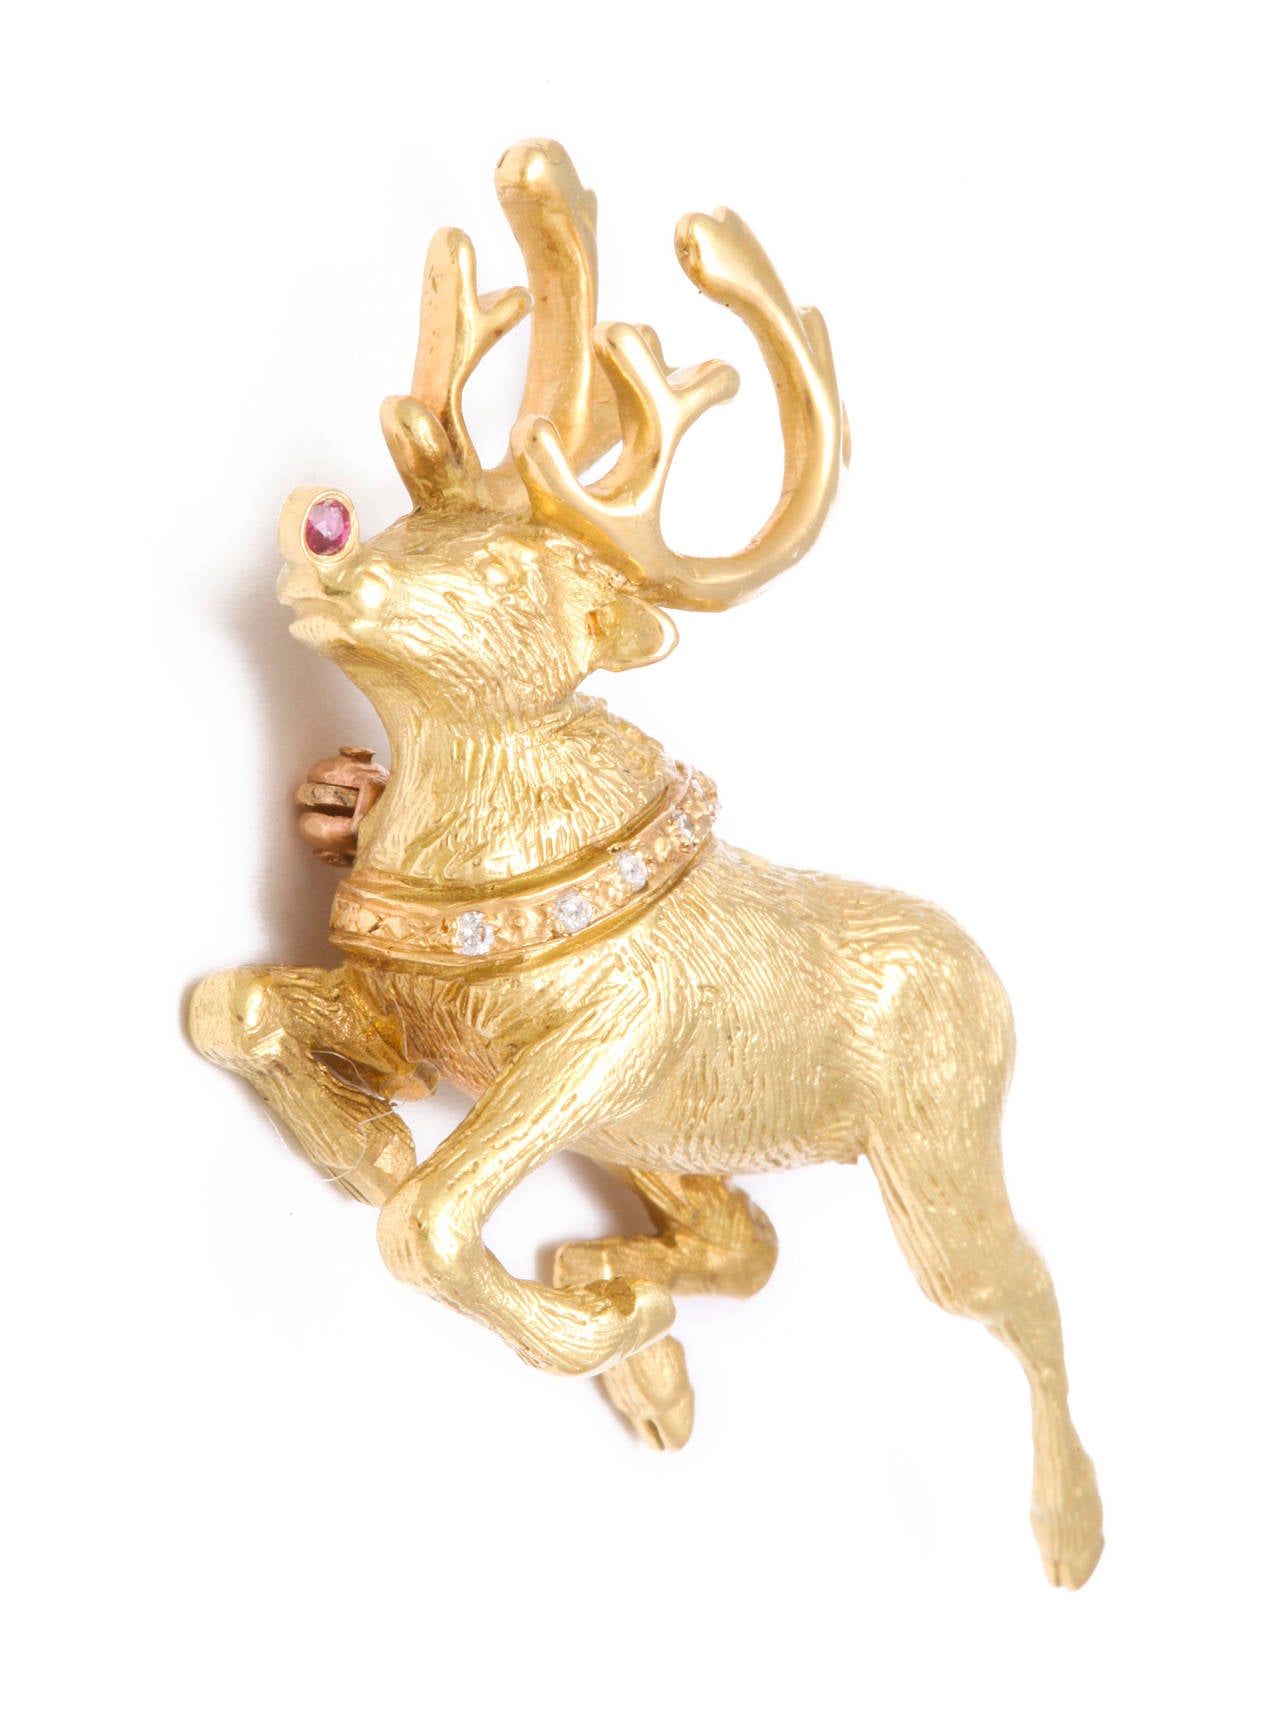 With a bright red ruby nose and a diamond collar this is Rudolph at his best.  Don't miss out on this wonderful brooch from the world's premier jeweler and America's house of design.

The Kanners family has been synonymous with rare and fine